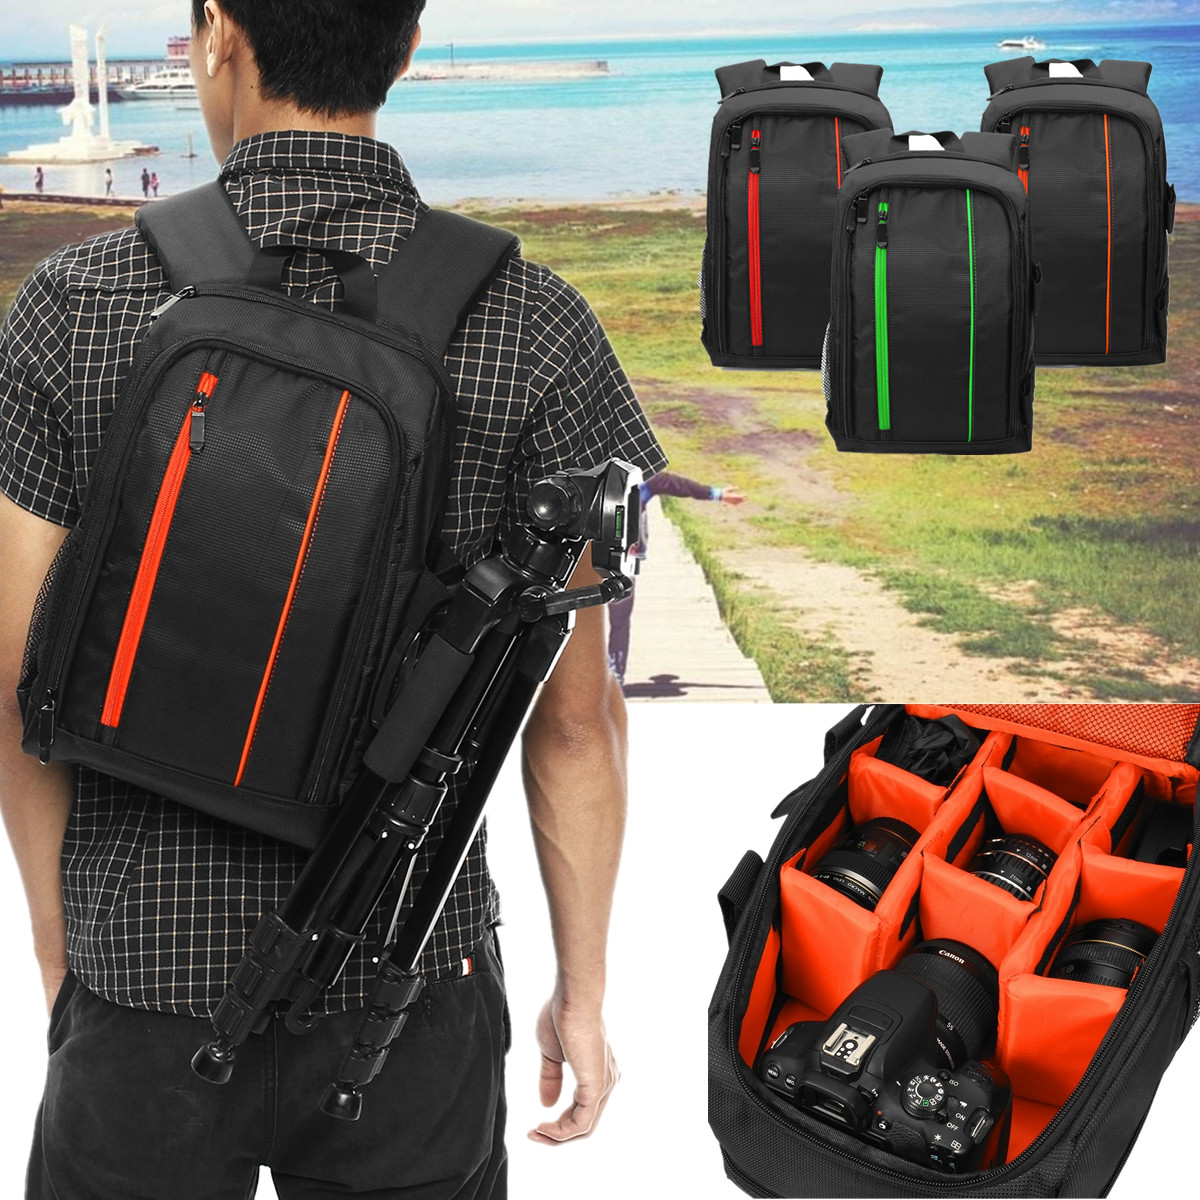 Waterproof Camera Backpack Travel DSLR Bag W/ Rain Cover For Canon Sony 15